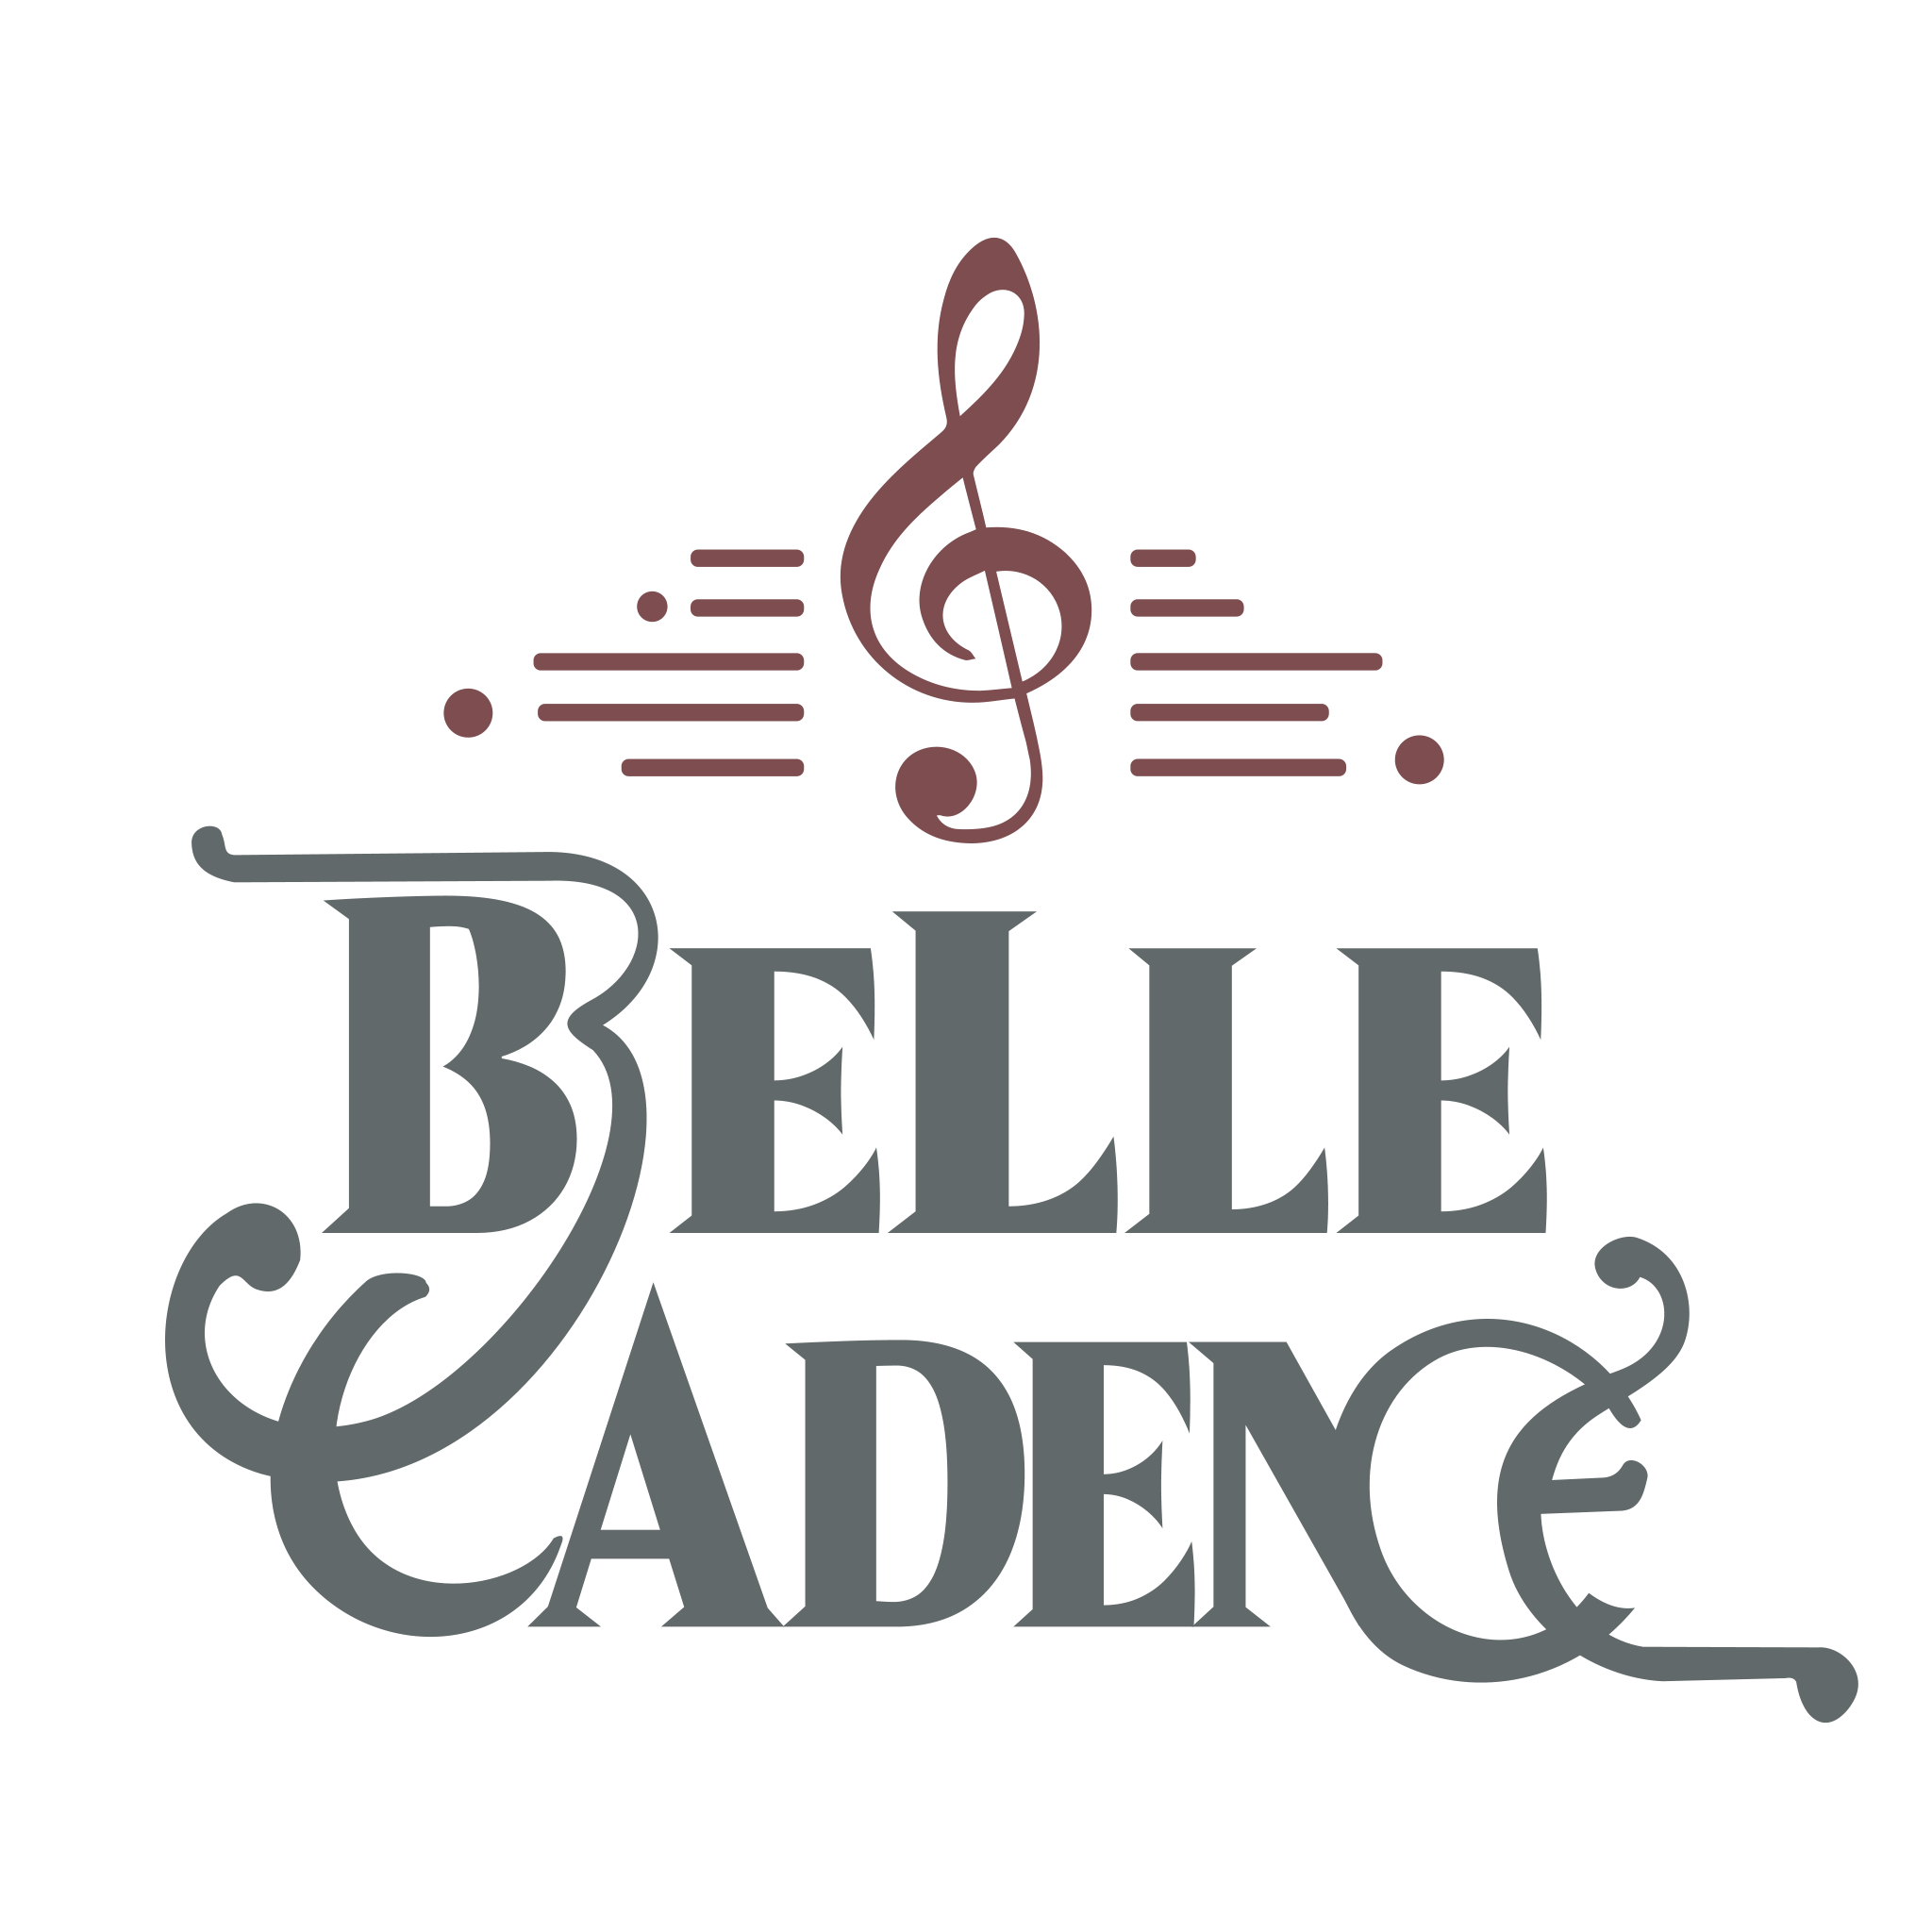 Welcome to Belle Cadence